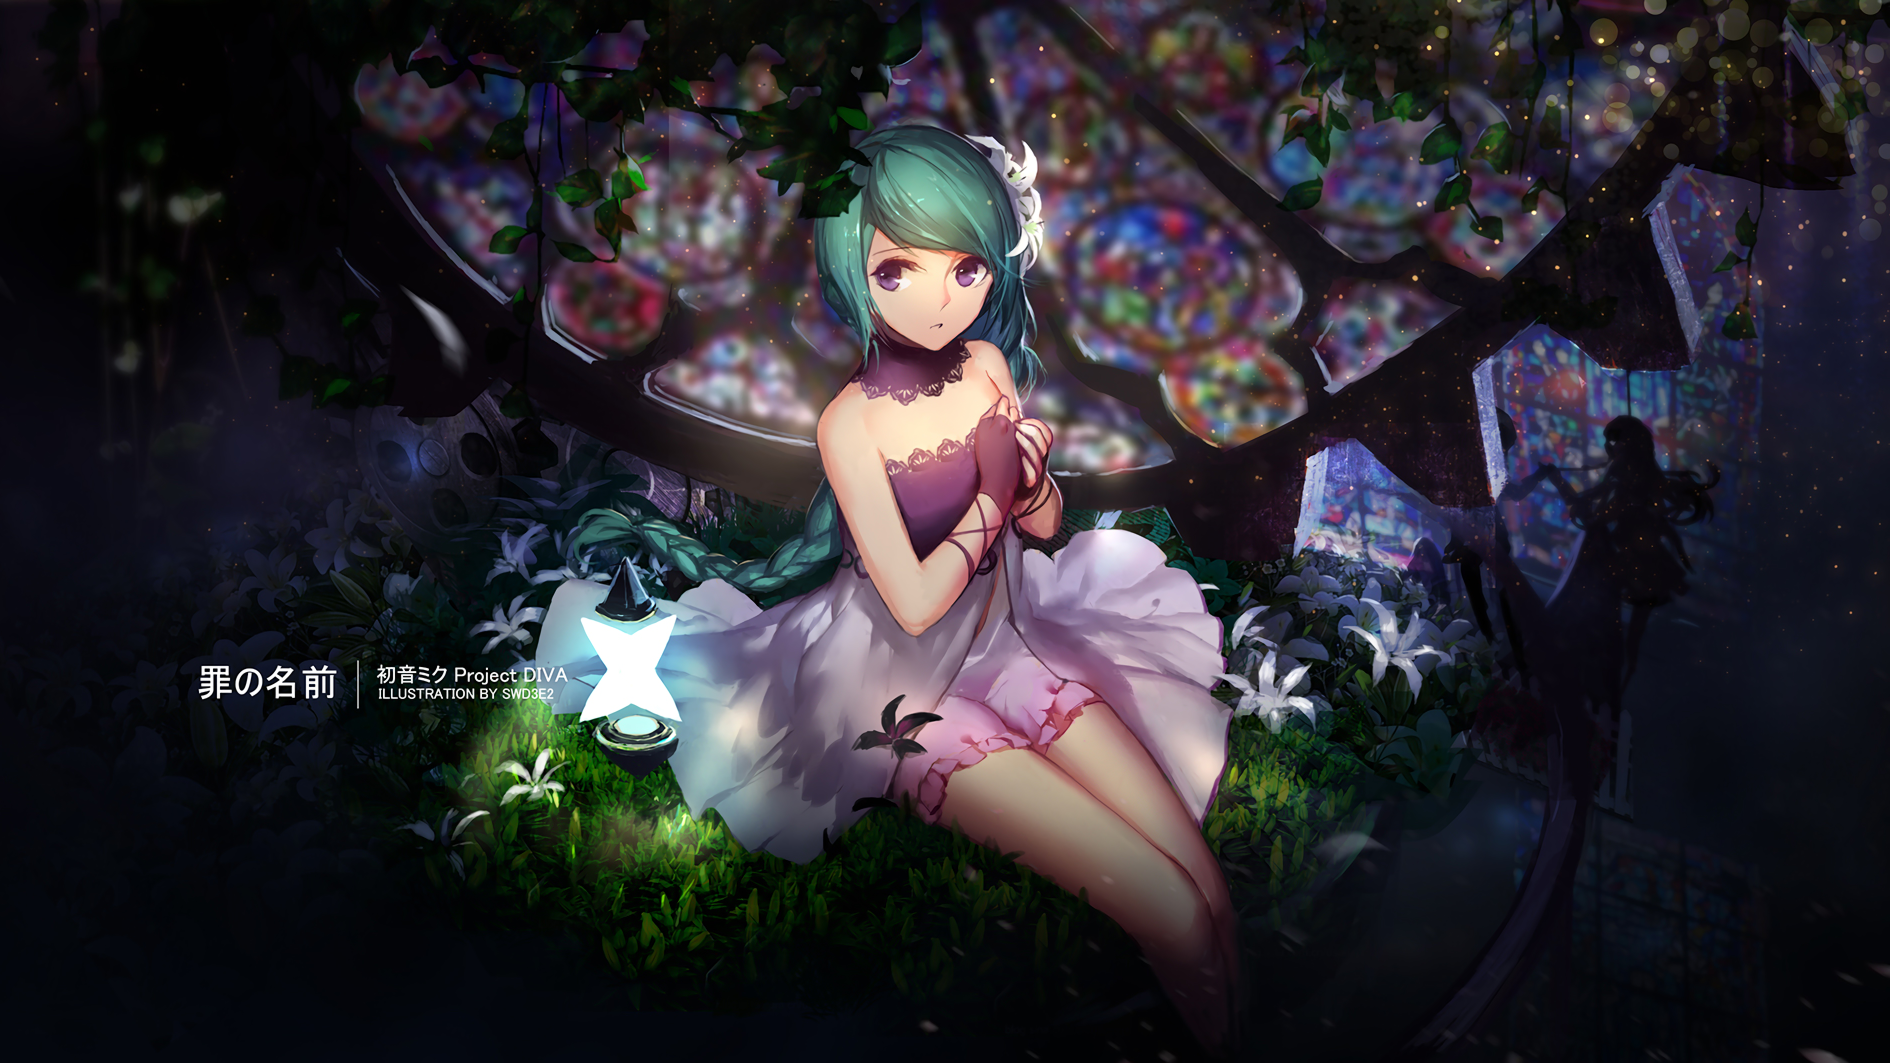 Anime 1890x1063 manga anime anime girls green hair dress thighs together fantasy art fantasy girl purple eyes Gear Wheels stained glass looking at viewer